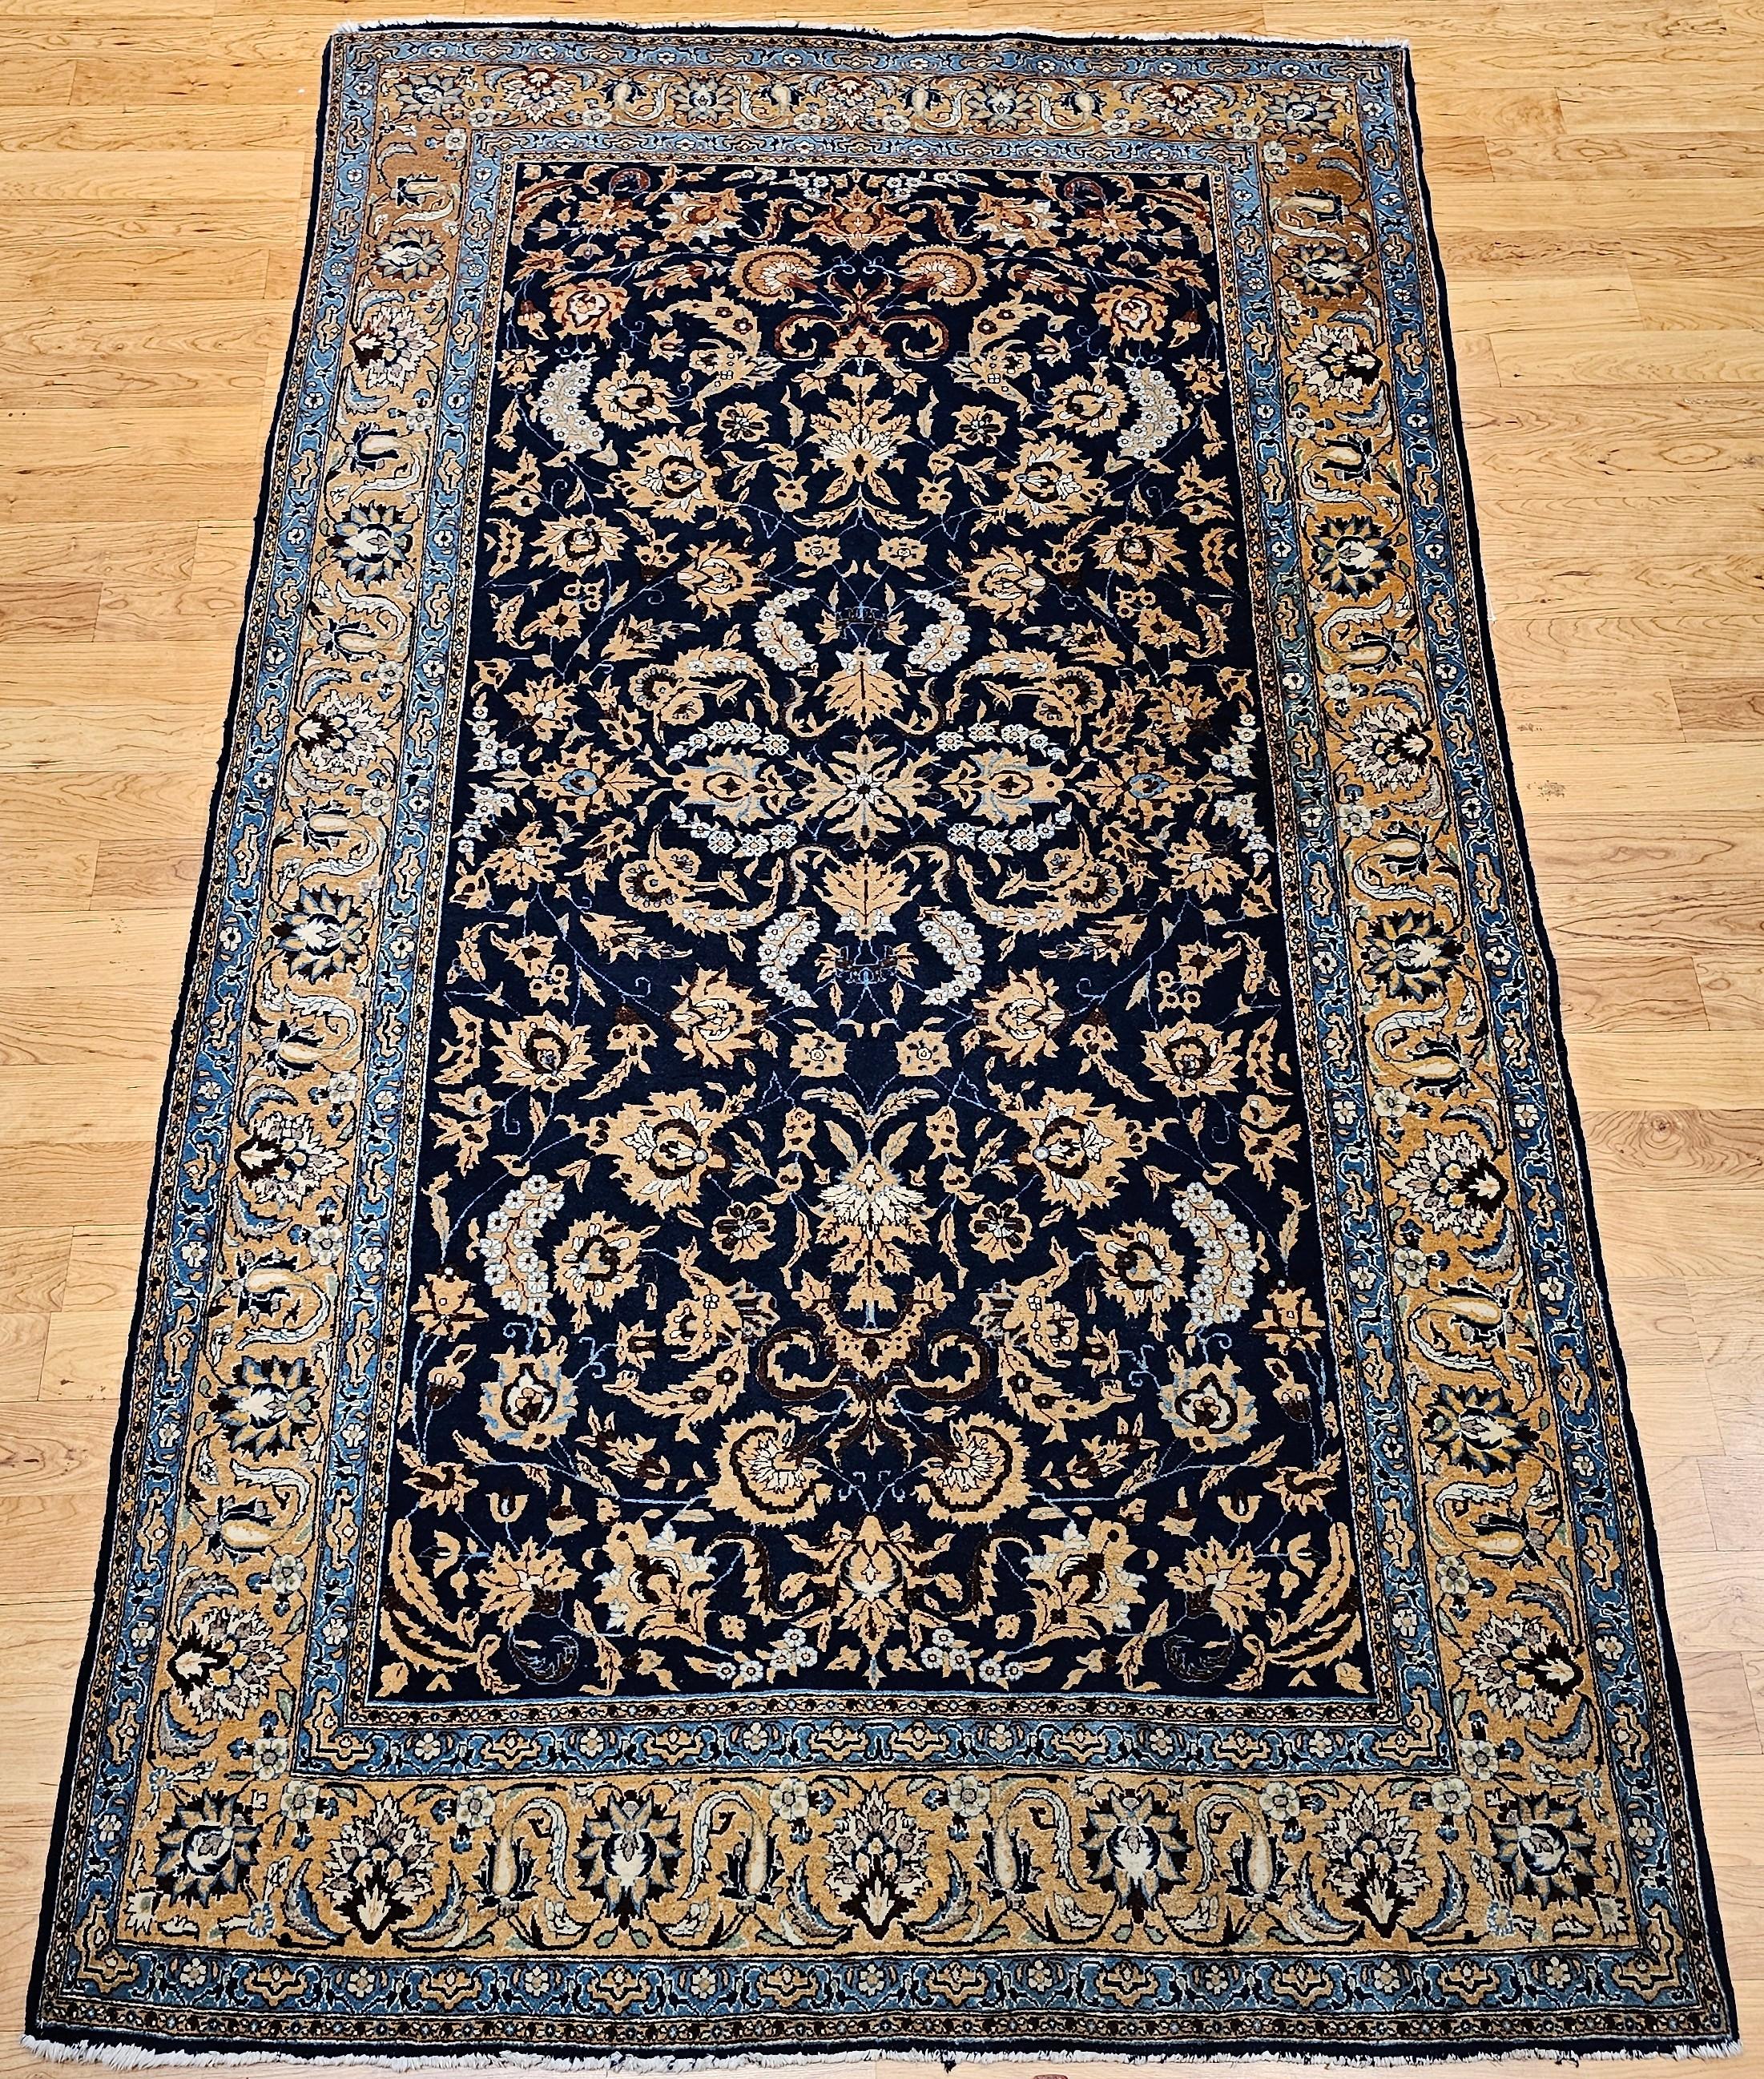 Beautiful room-size Tabriz rug from the early 1900s in an allover pattern similar to Safavid dynasty era “Sickle and Leaf” pattern with a navy blue background color.  The branches and leaves are in caramel, chocolate, rust, and pale blue colors.  It